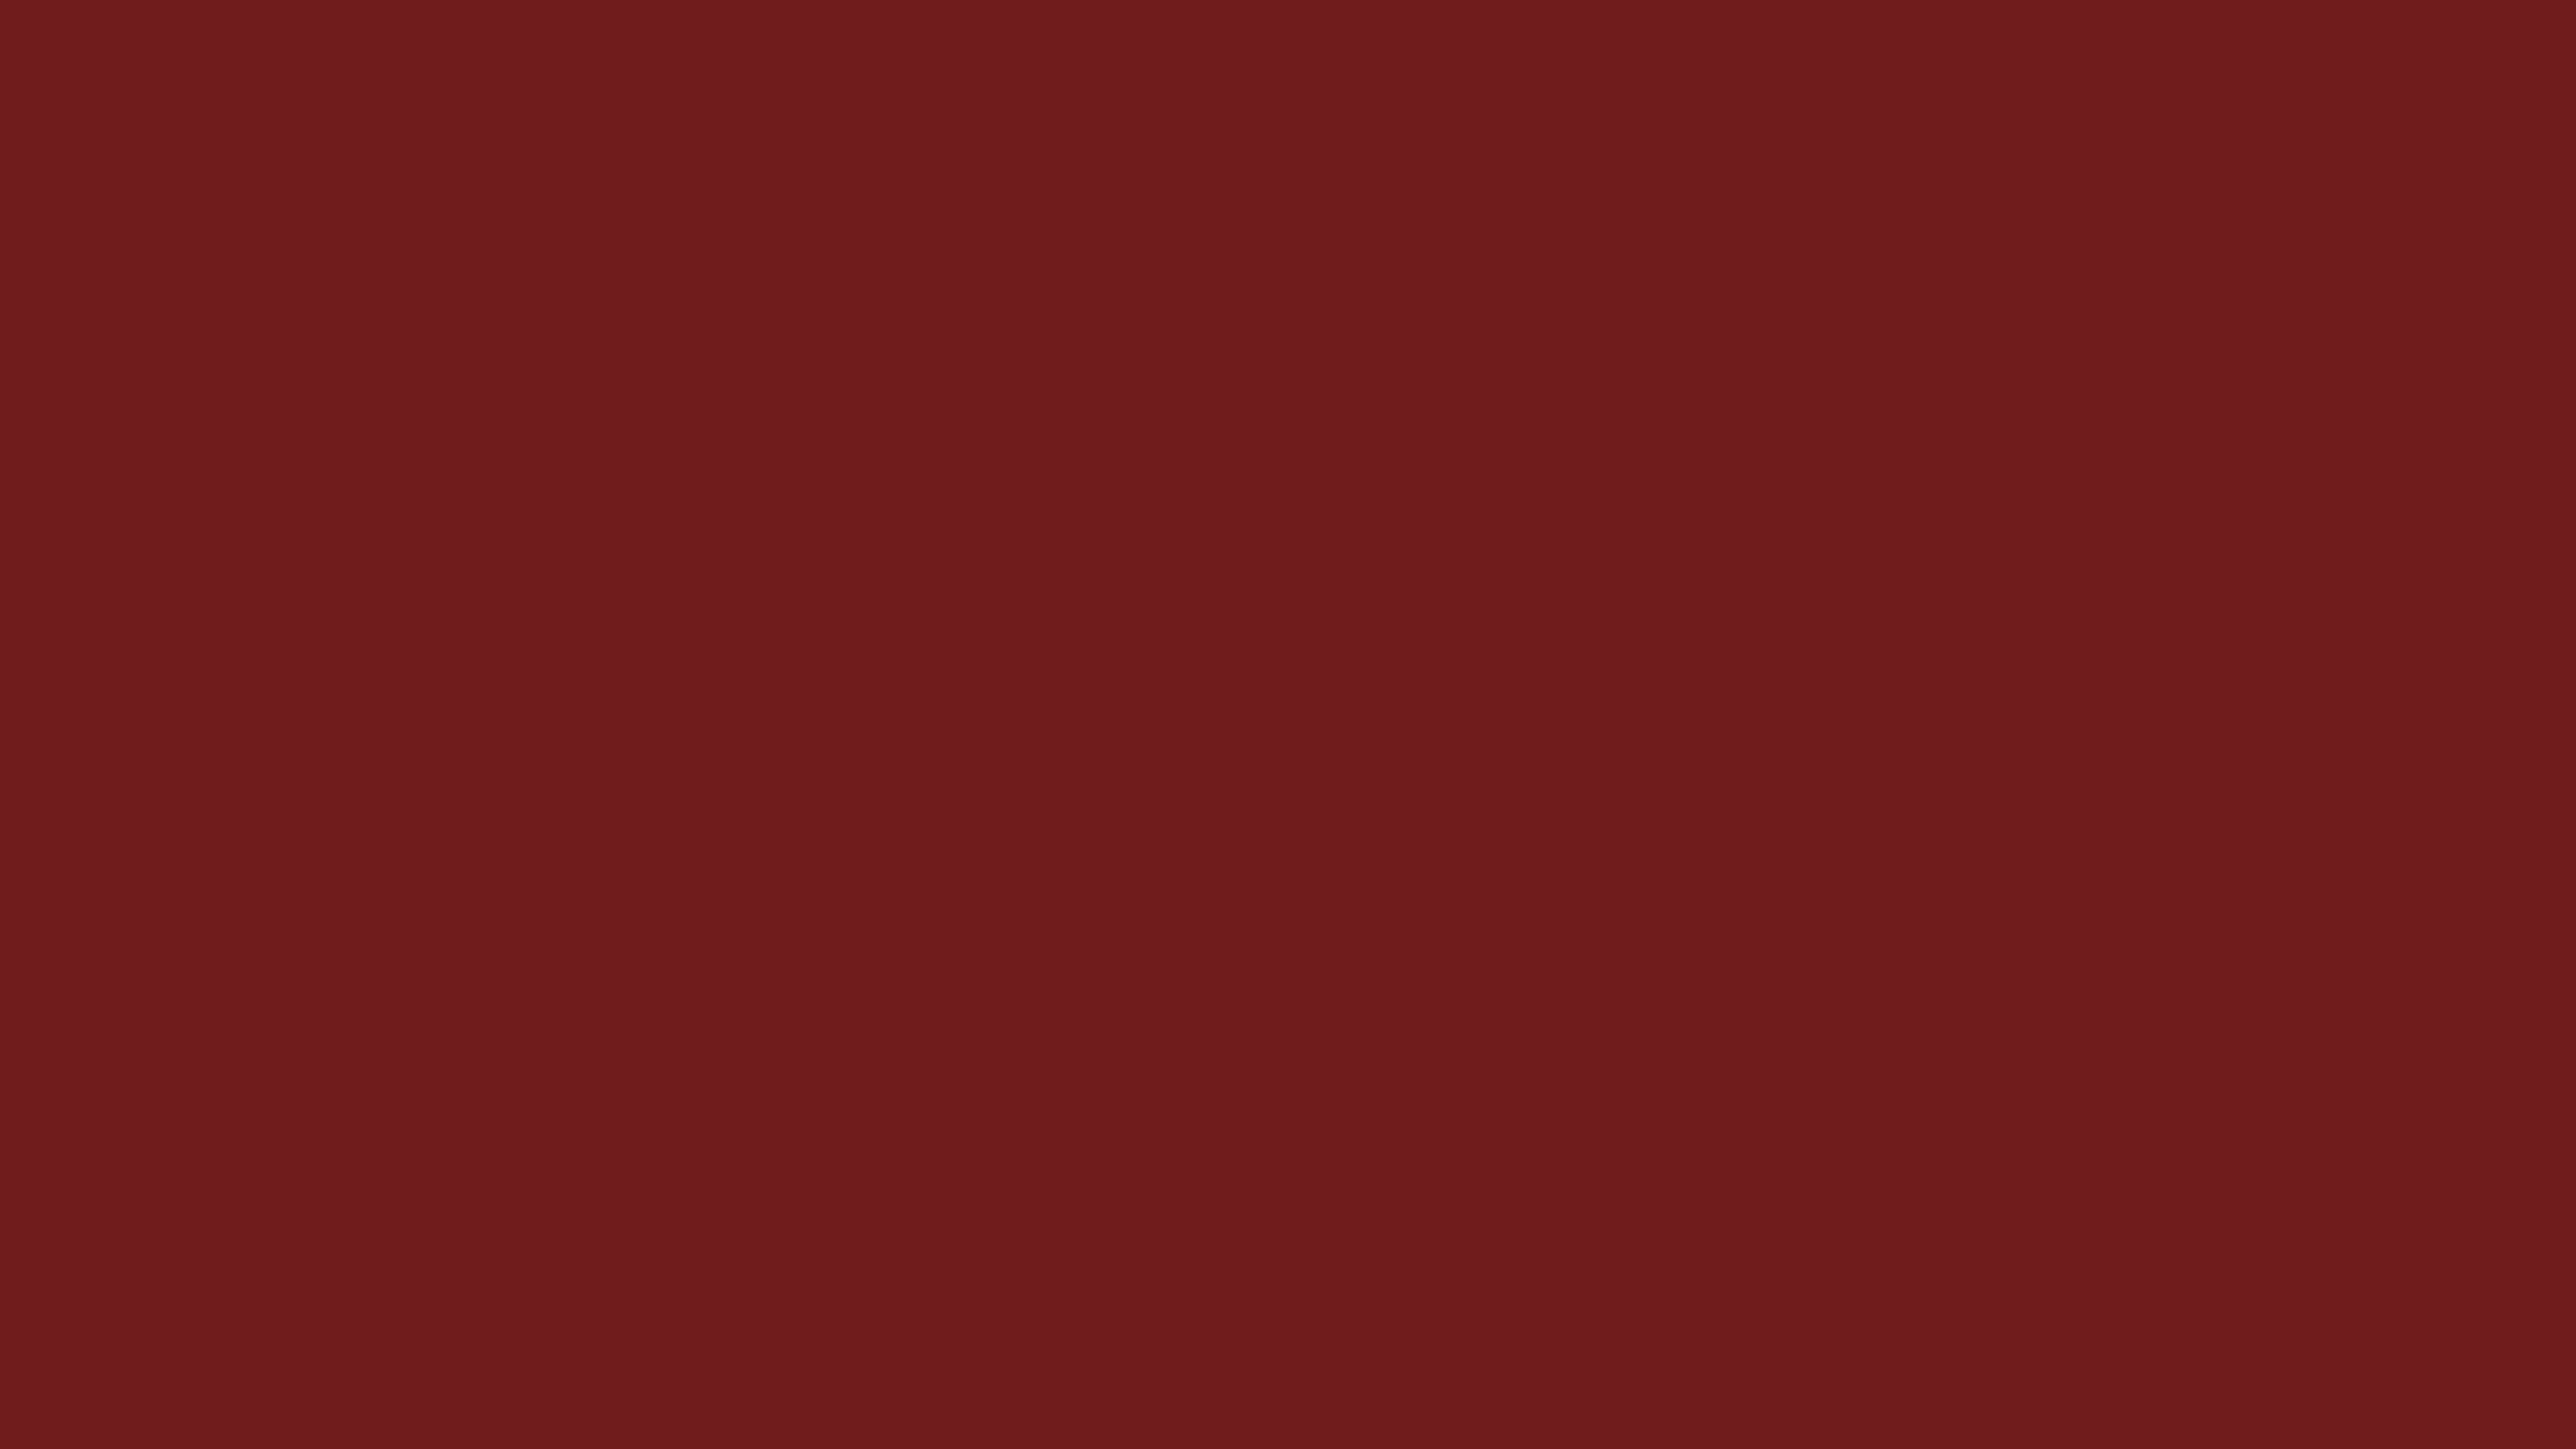 7680x4320 Persian Plum Solid Color Background